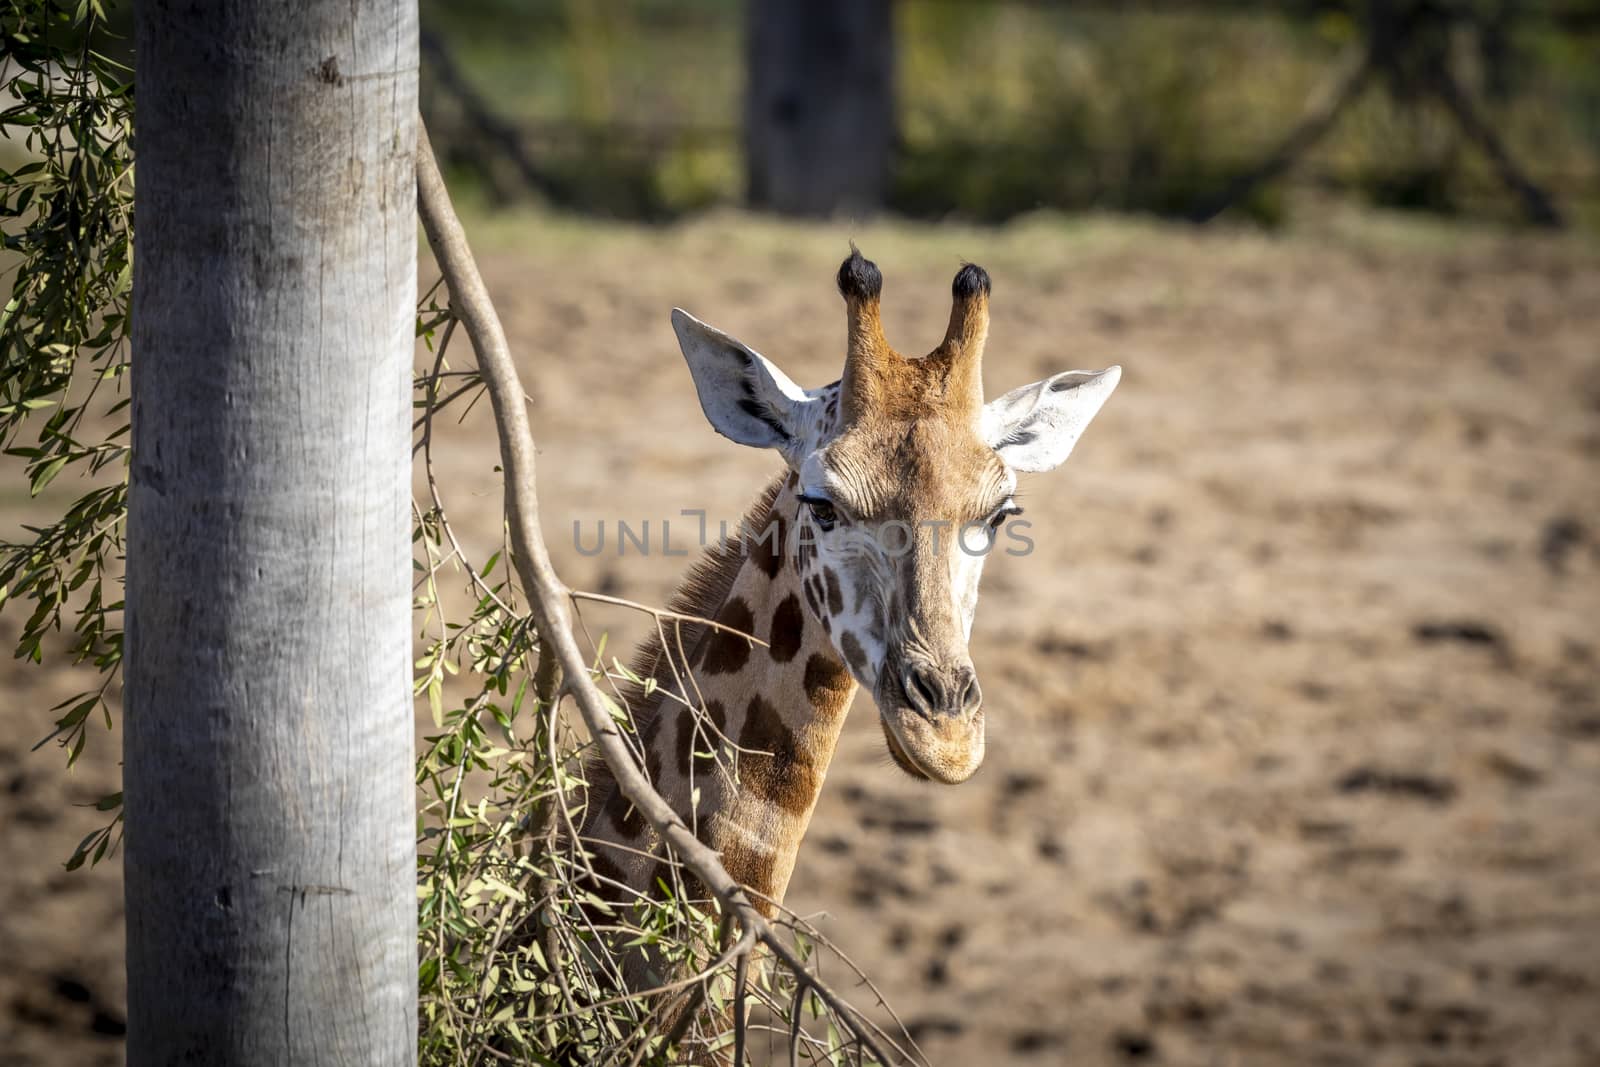 A young Giraffe eating leaves in a field in the sunshine